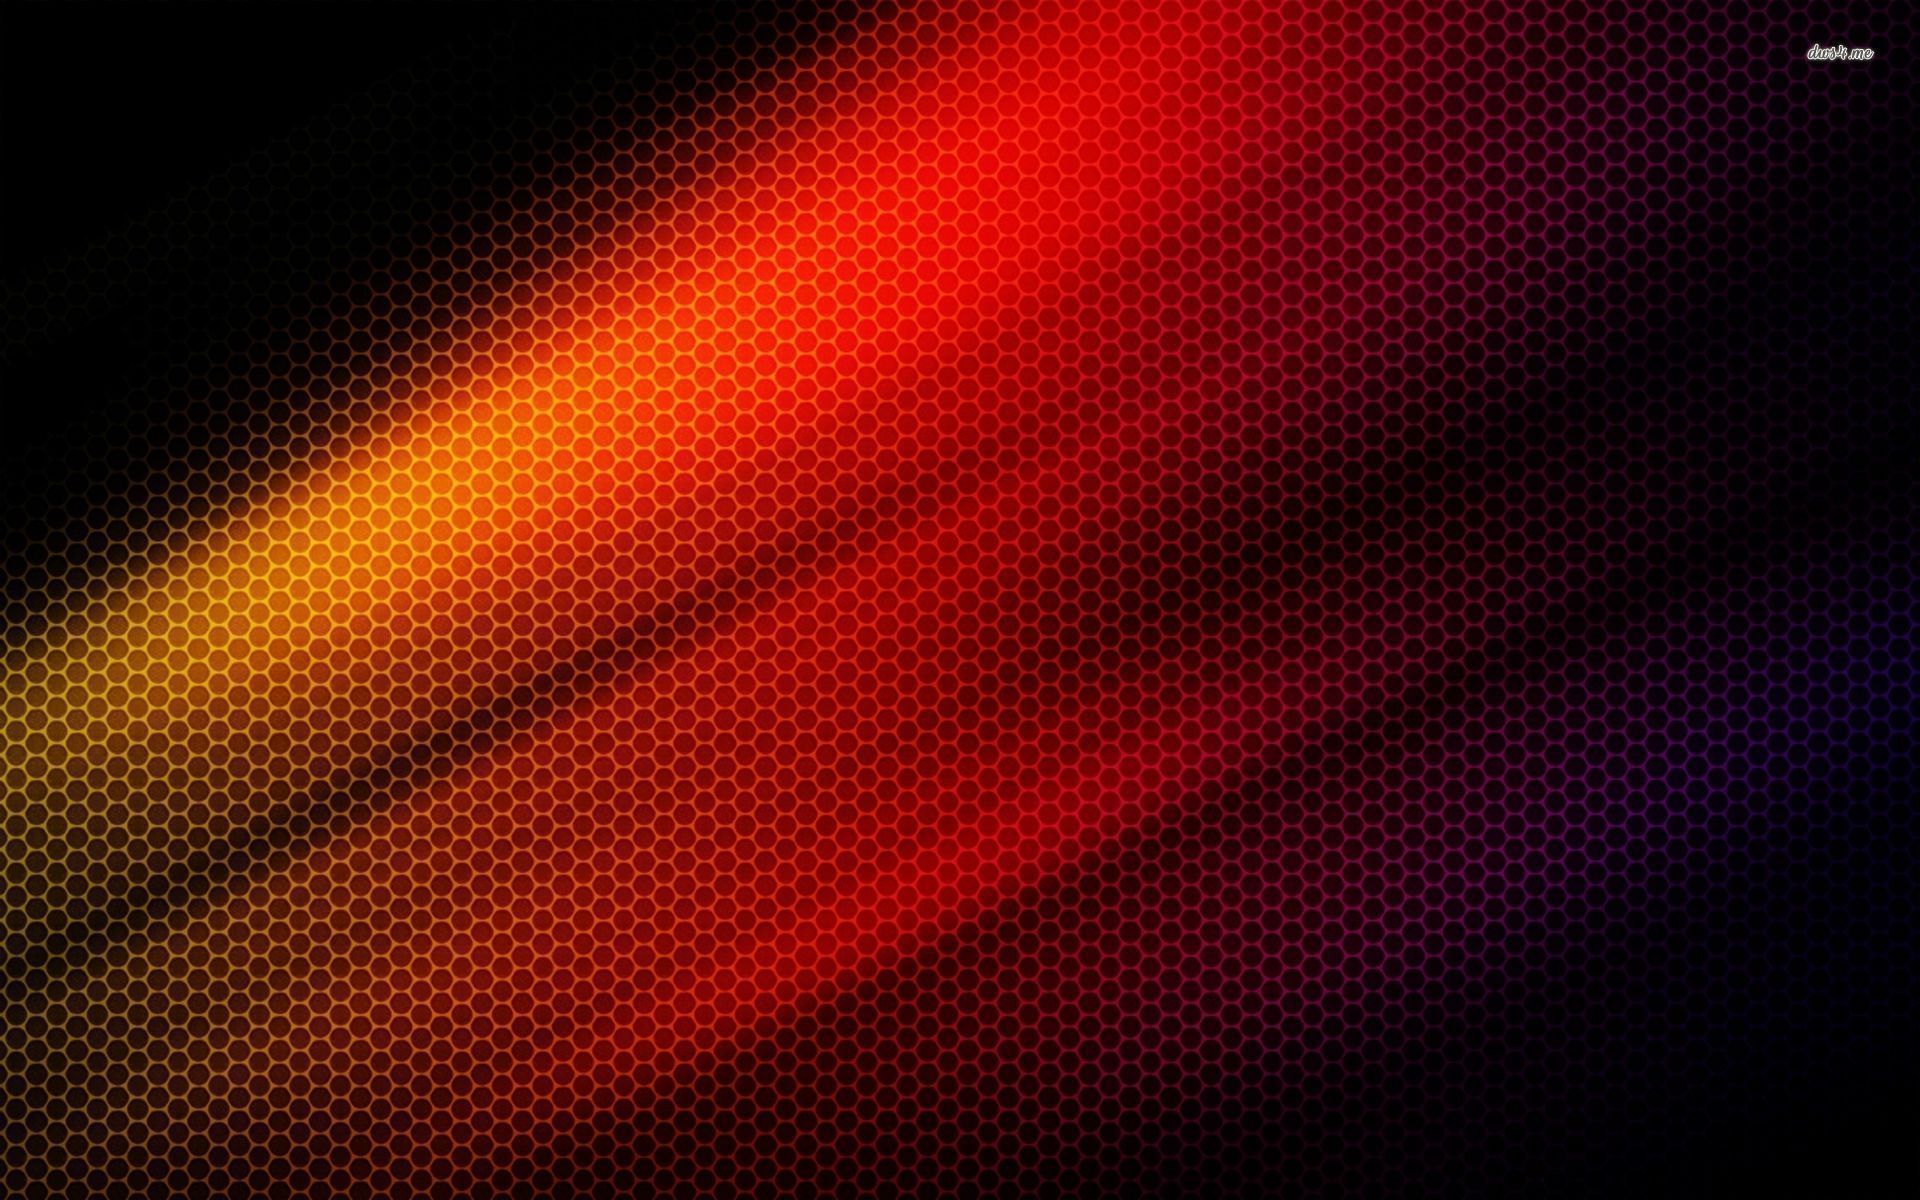 Red lines over honeycomb pattern wallpaper - Abstract wallpapers ...